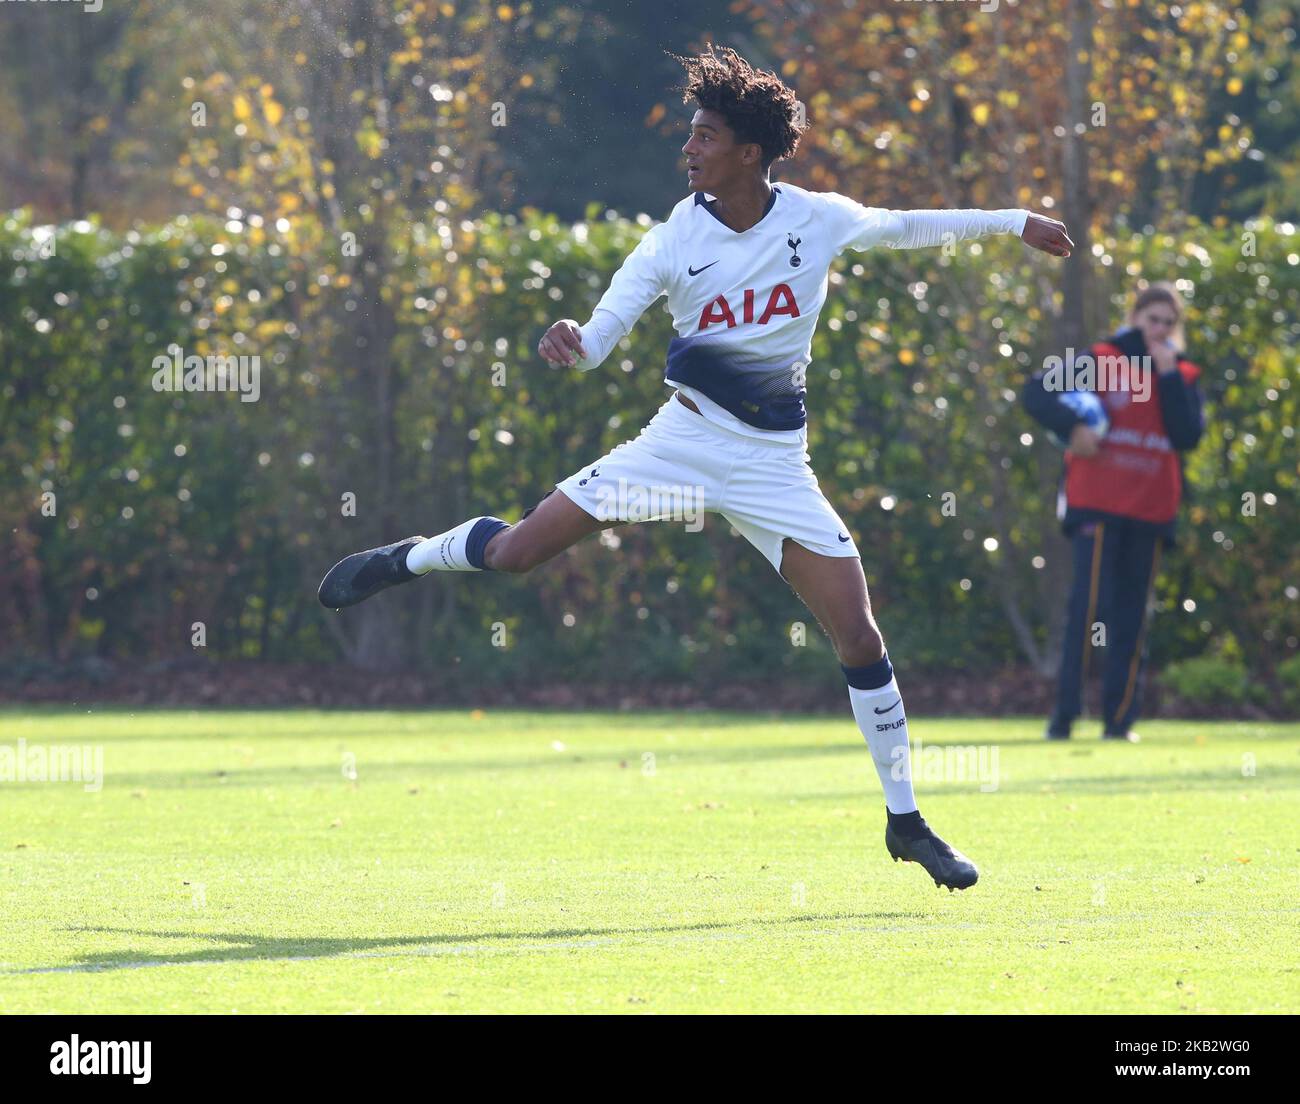 Enfield, UK. 06 November, 2018 Brooklyn Lyons-Foster of Tottenham Hotspur during UEFA Youth League match between Tottenham Hotspur and PSV Eindhoven at Hotspur Way, Enfield. (Photo by Action Foto Sport/NurPhoto)  Stock Photo